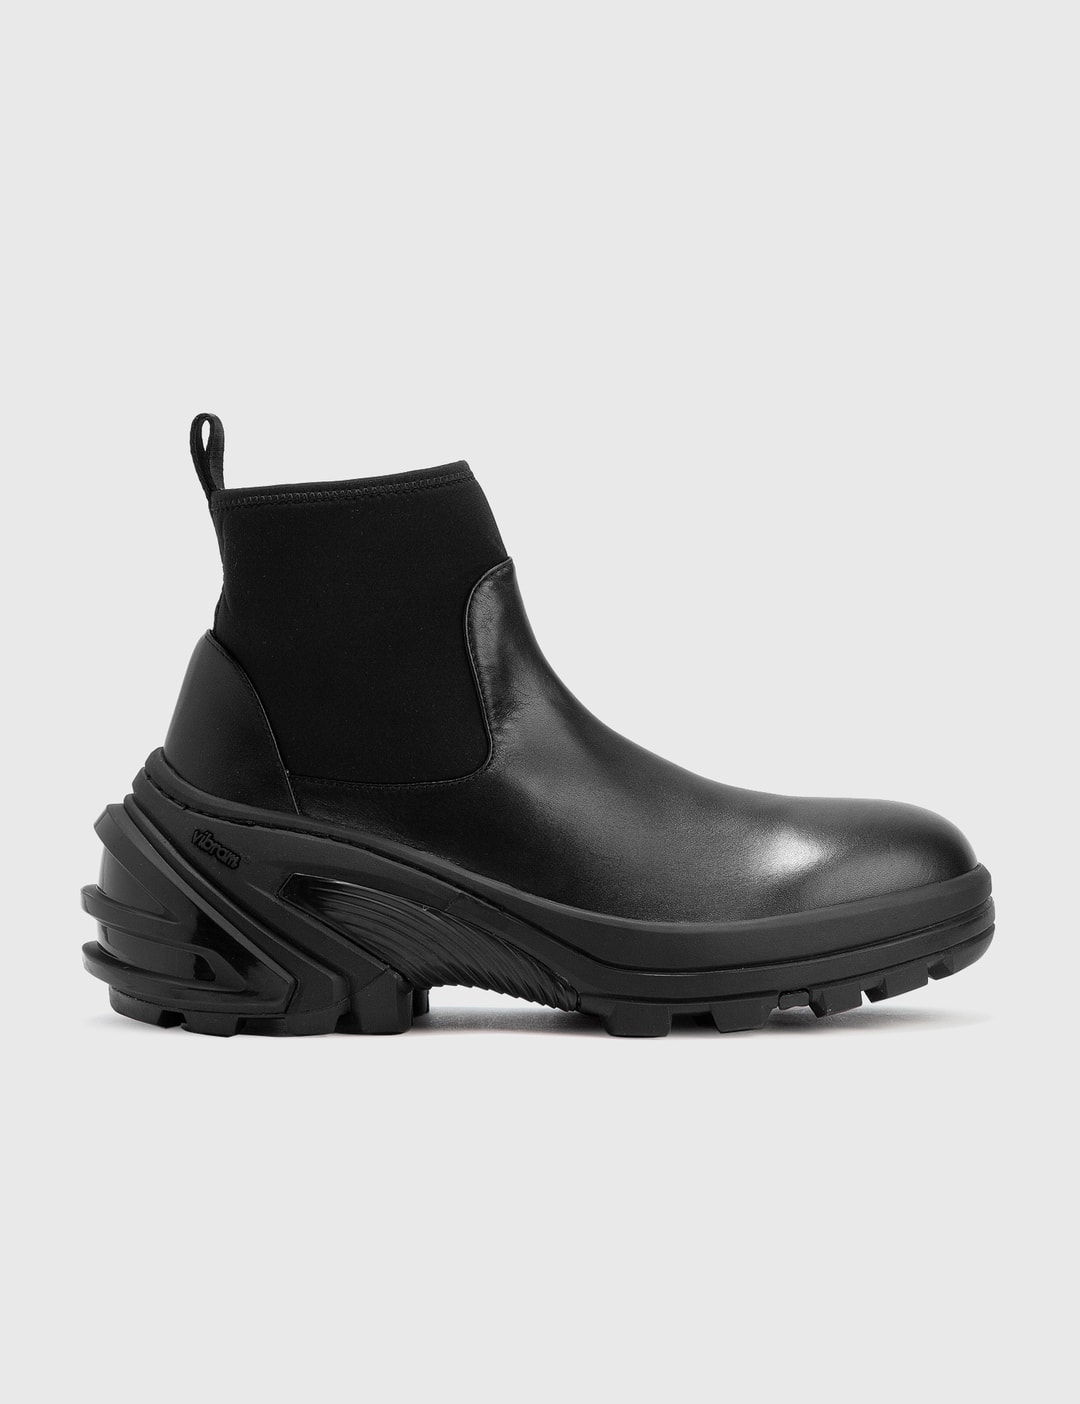 1017 ALYX 9SM - Leather Mid Boot With Skx Sole | HBX - Globally Curated ...